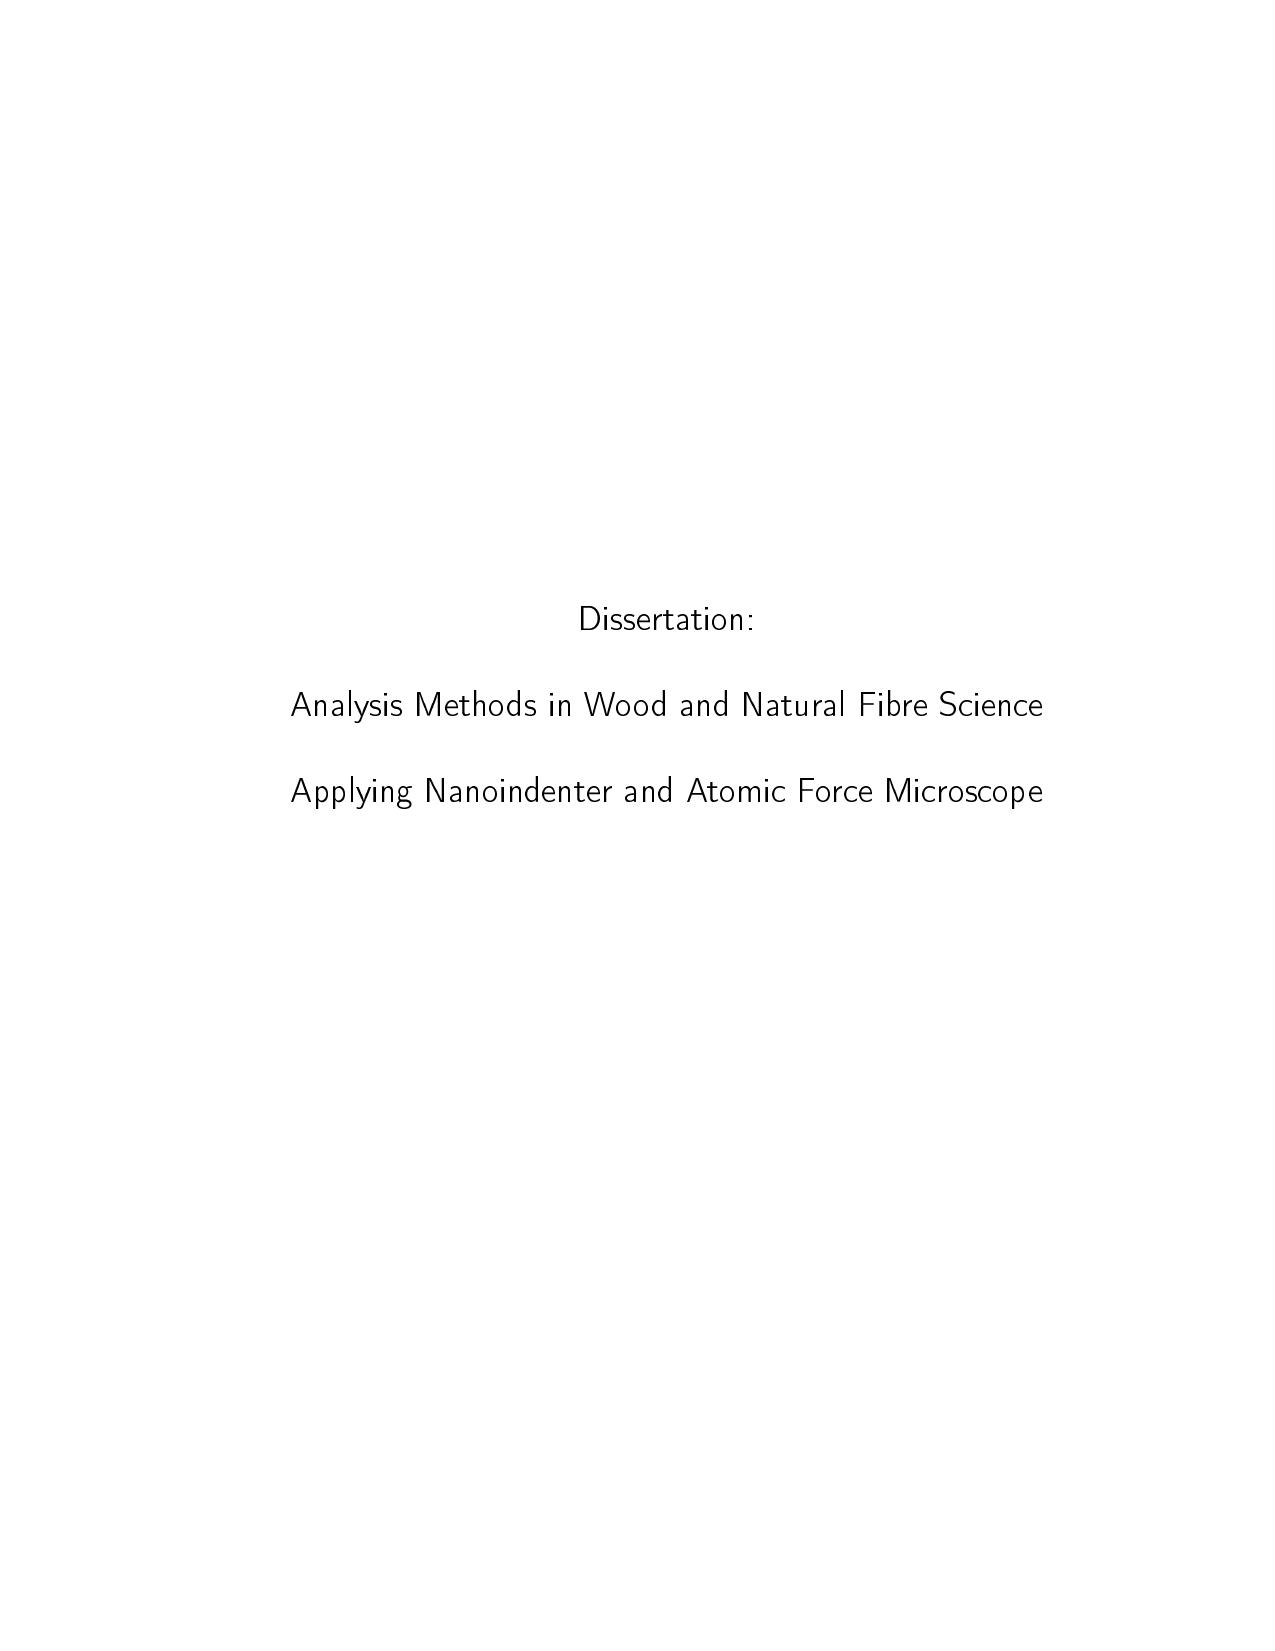 ANALYSIS METHOD IN WOOD AND NATURAL FIBRE   2014